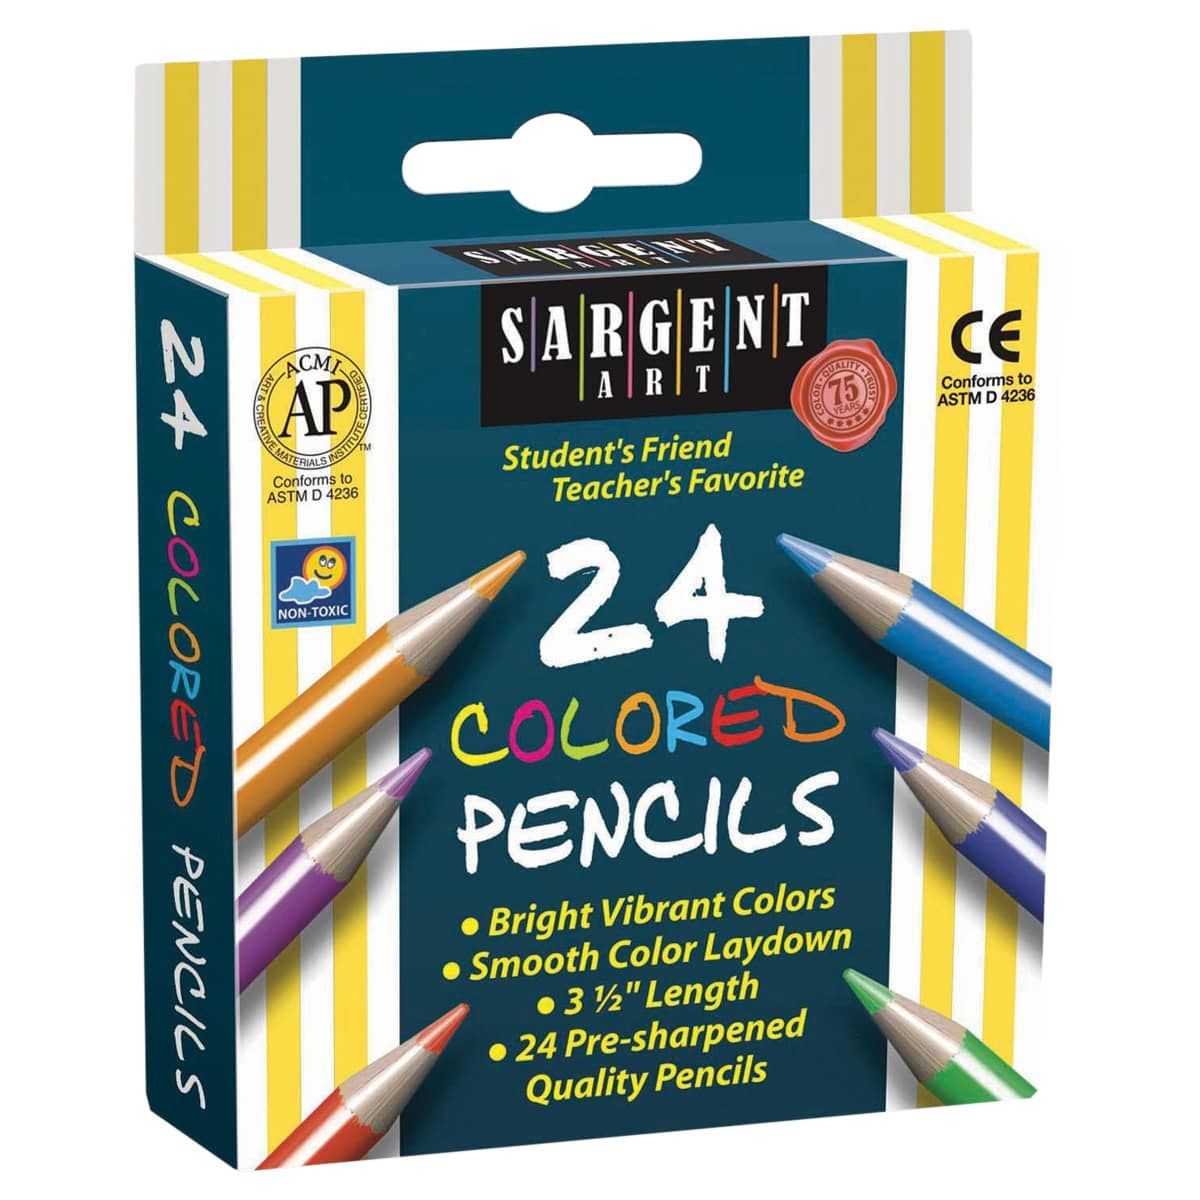 50 Assorted Pencil Set for Coloring Pages & Books Watercolor Kids & Adults School Supplies Drawing Colore Premium Art Pencils Pack Colored Charcoal and Metallic Color Pencils for Students 